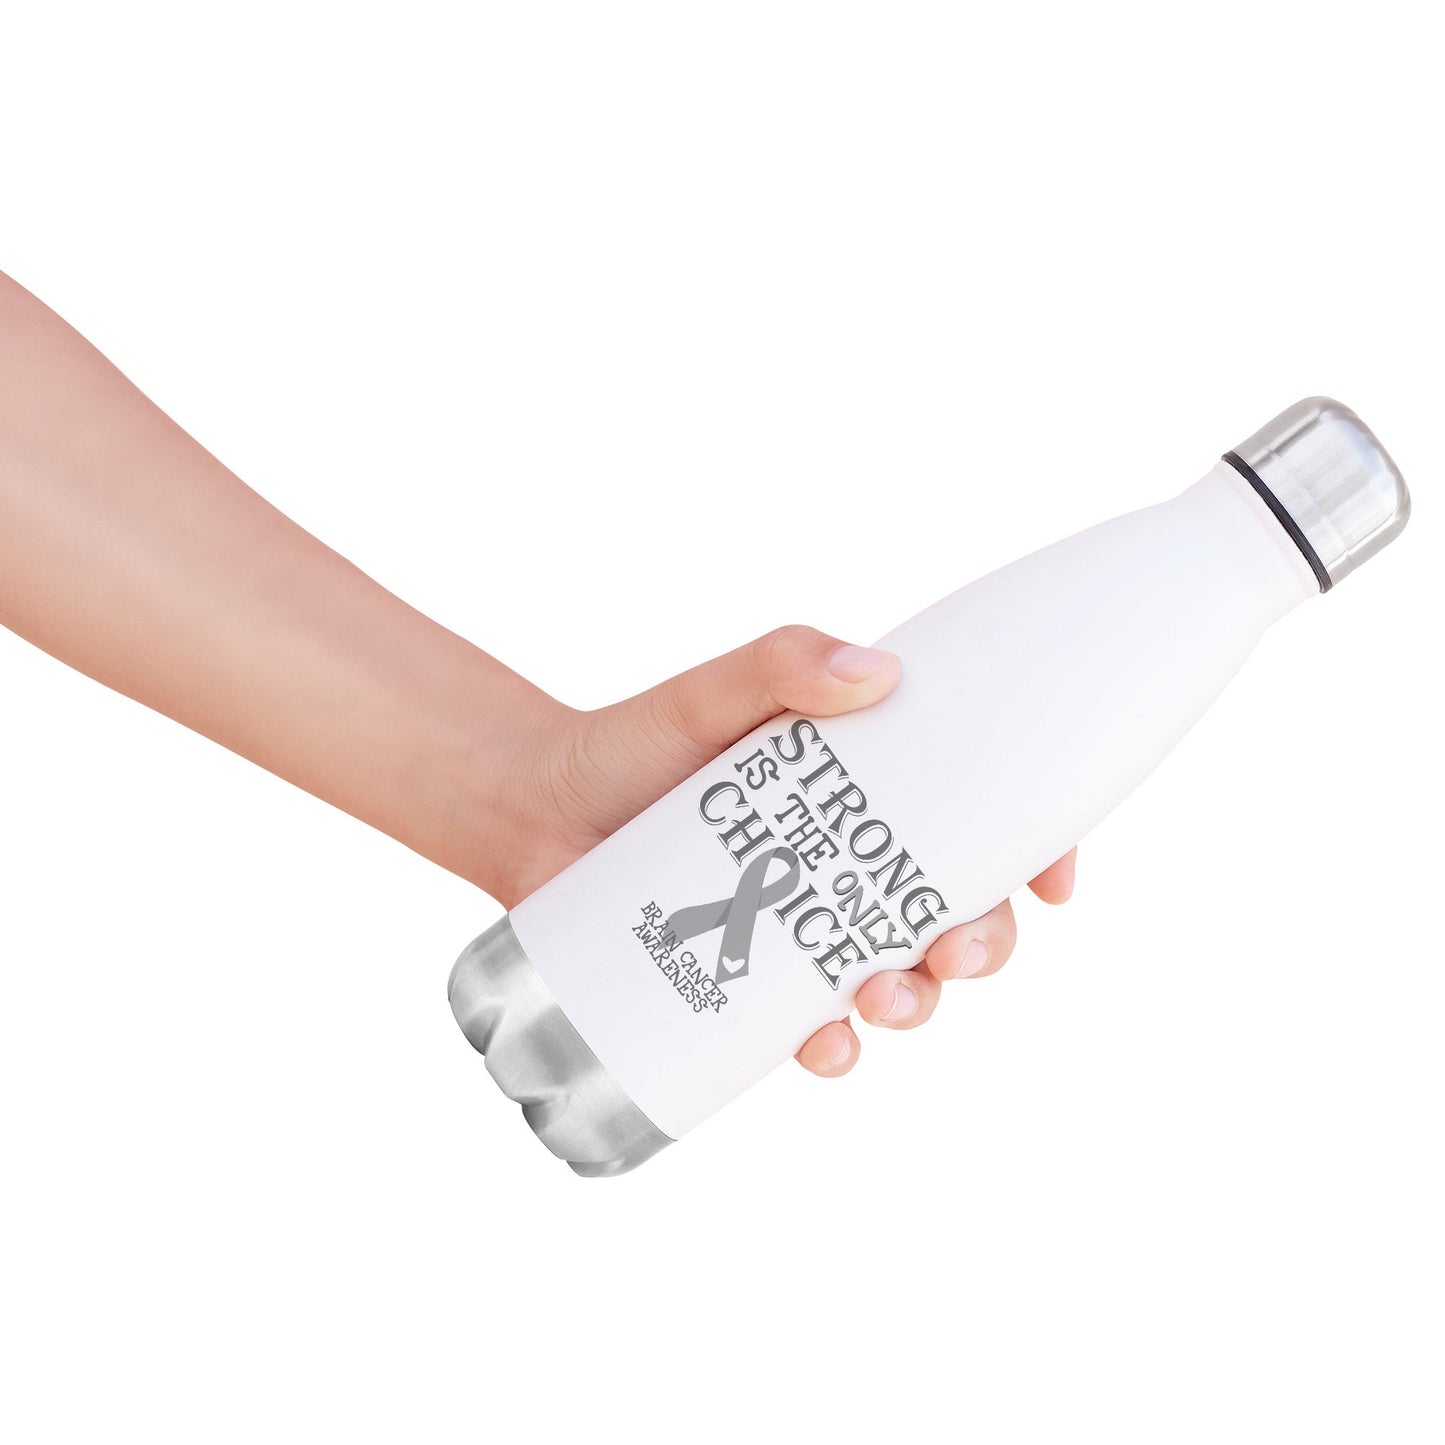 Strong is the Only Choice -Brain Cancer Awareness 20oz Insulated Water Bottle |x|